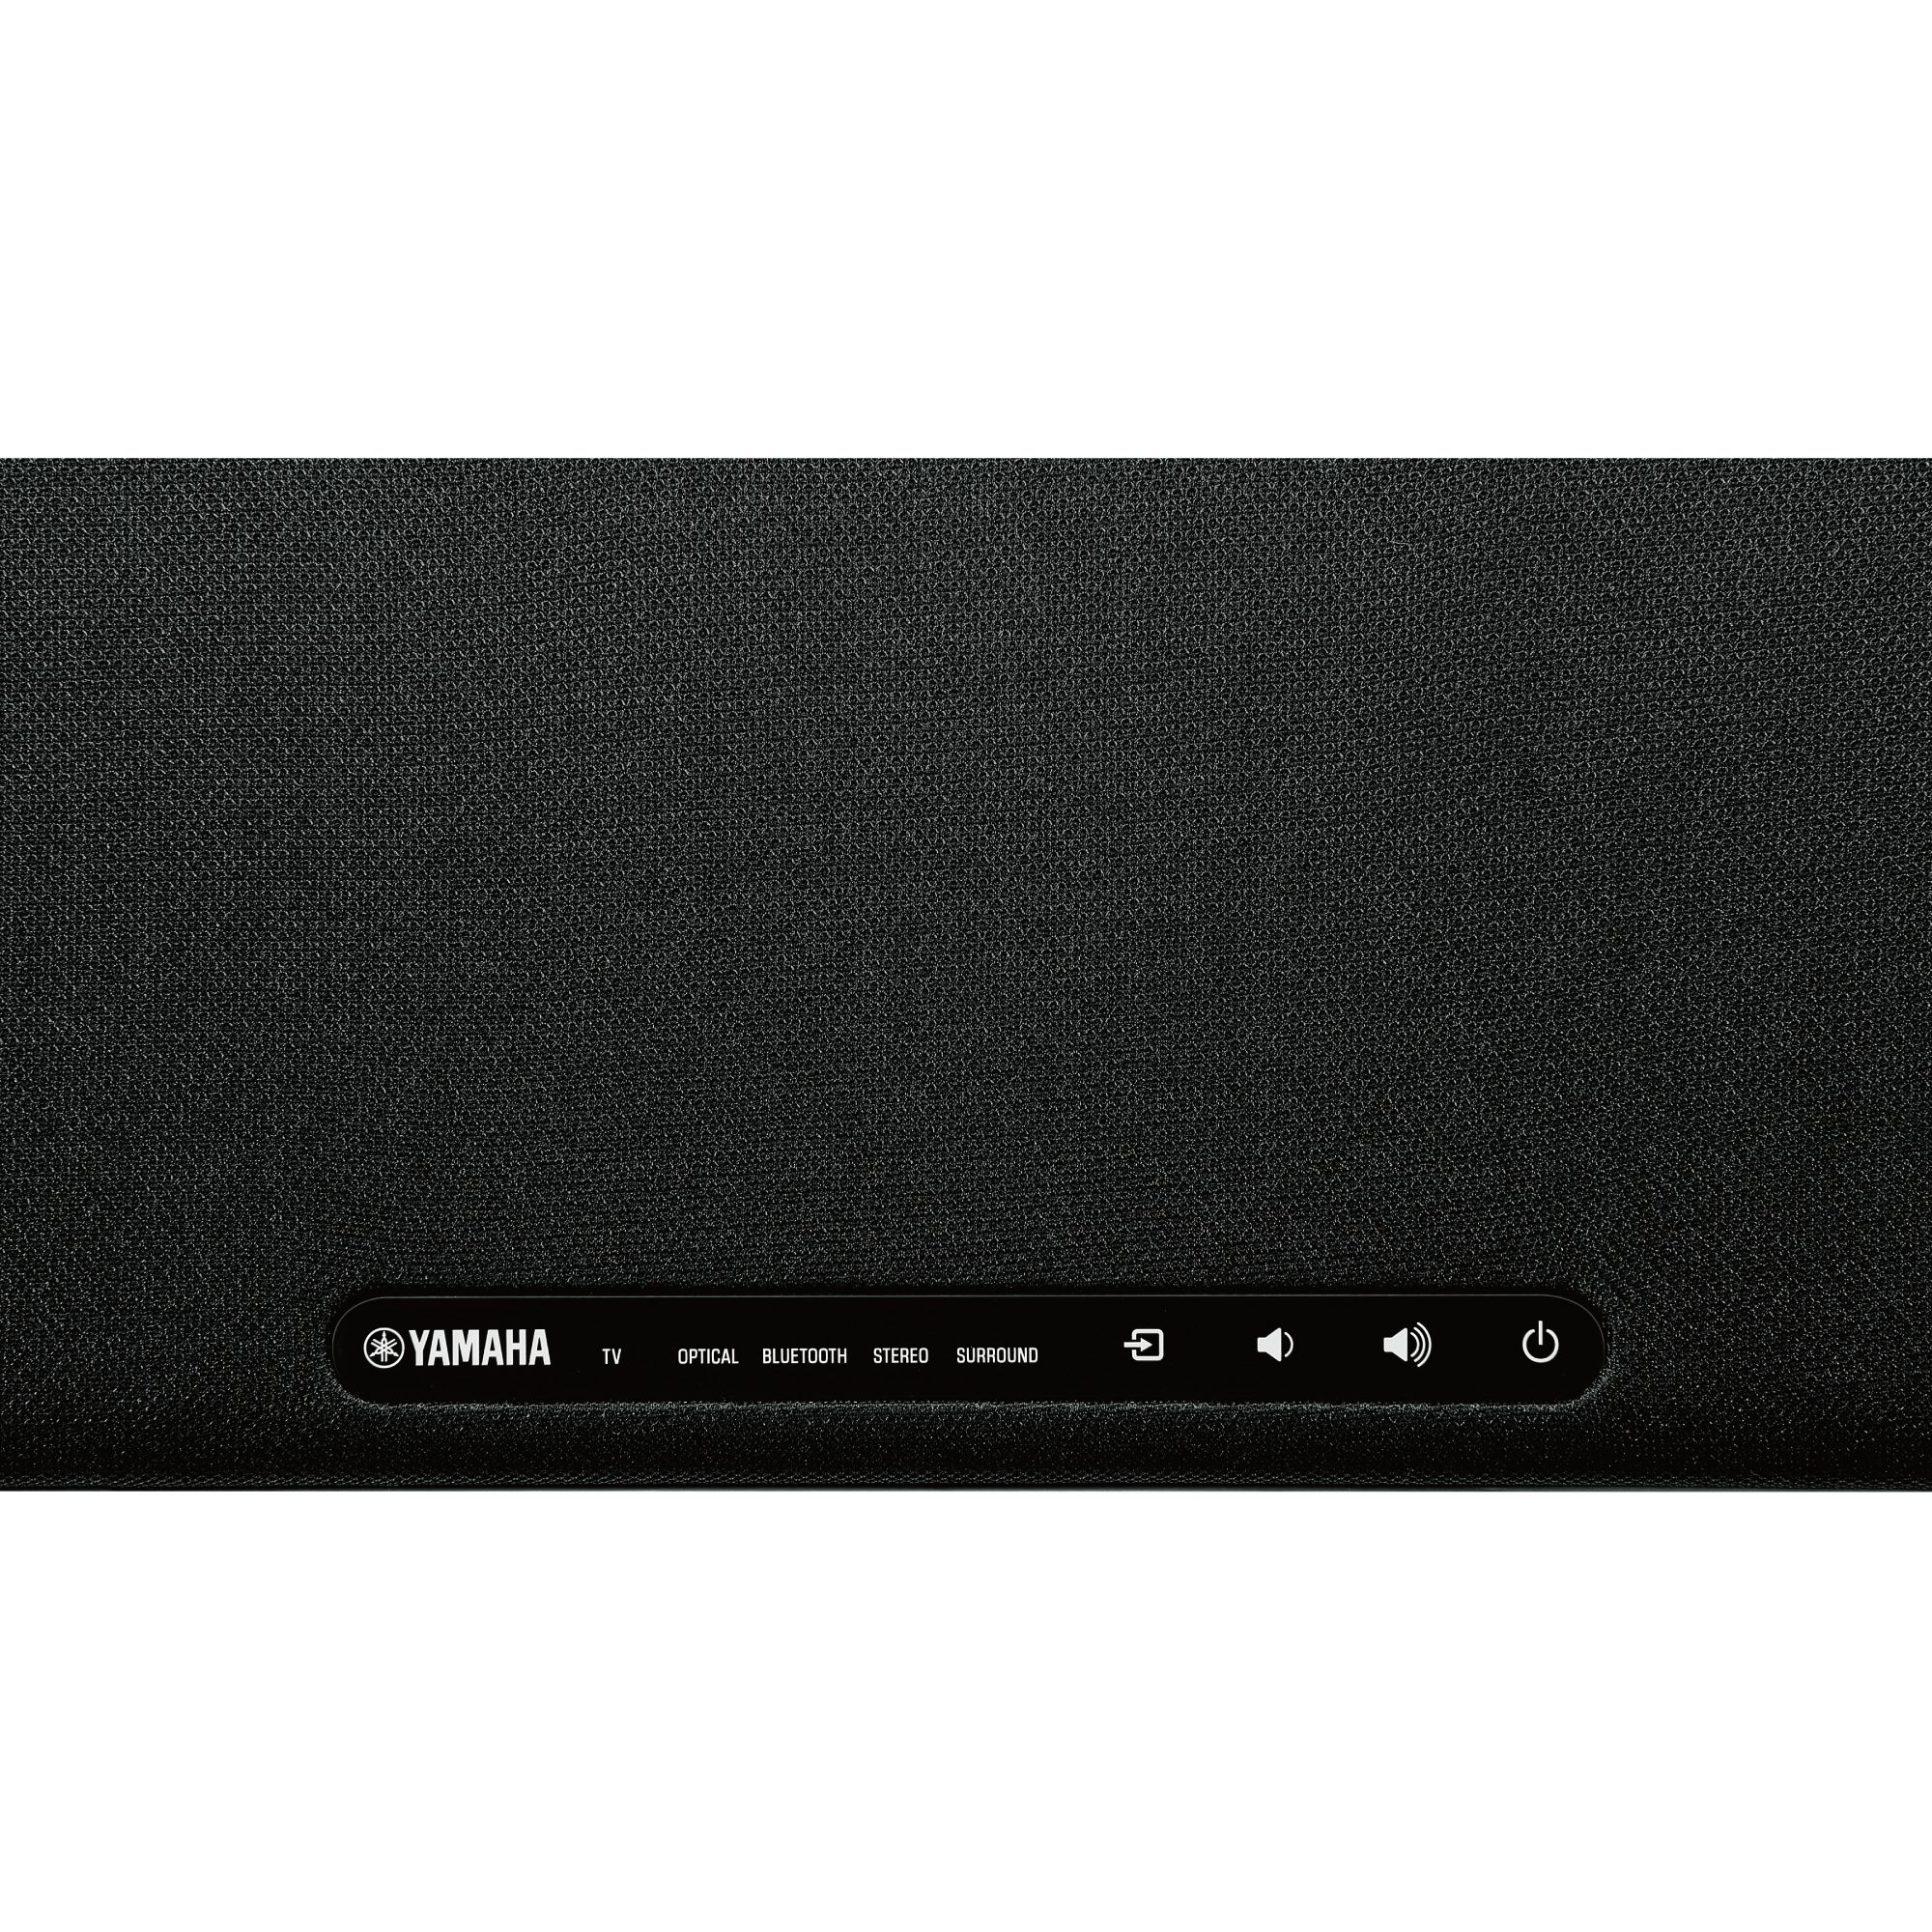 SR-B20A - Overview - Sound Bars - Audio & Visual - Products